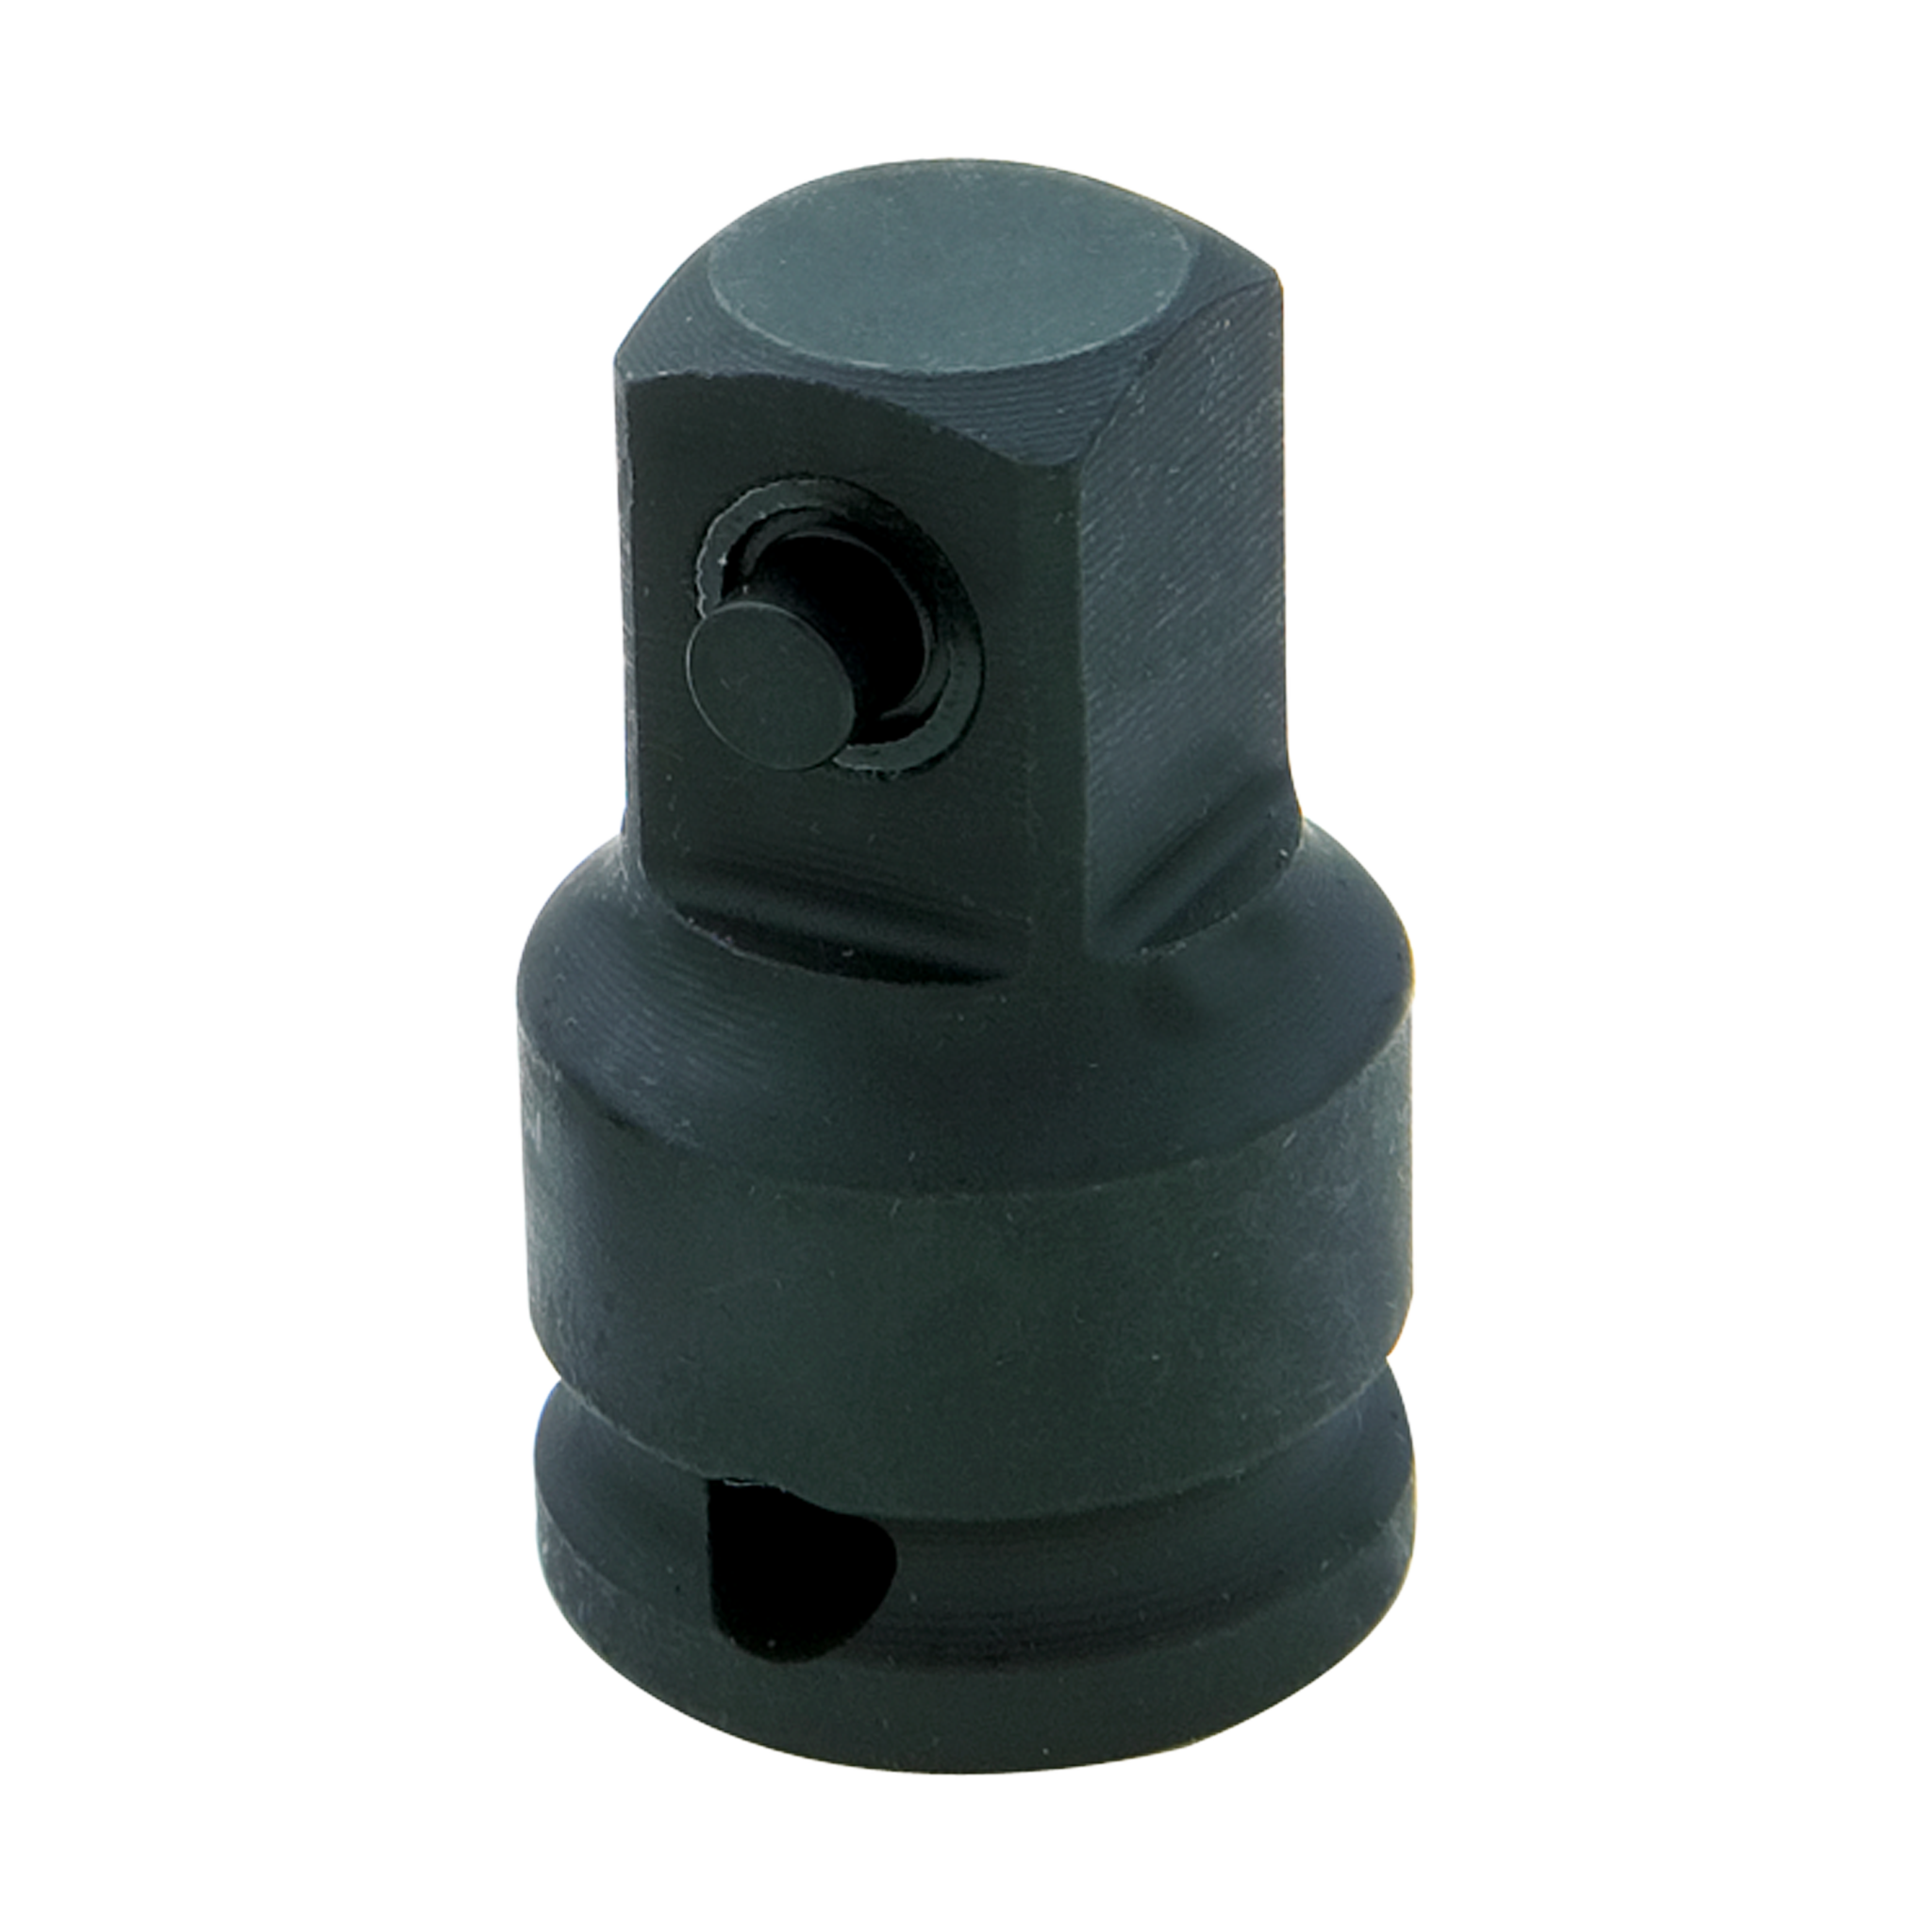 3/8" Drive Adapter - Impact Black Industrial Finish